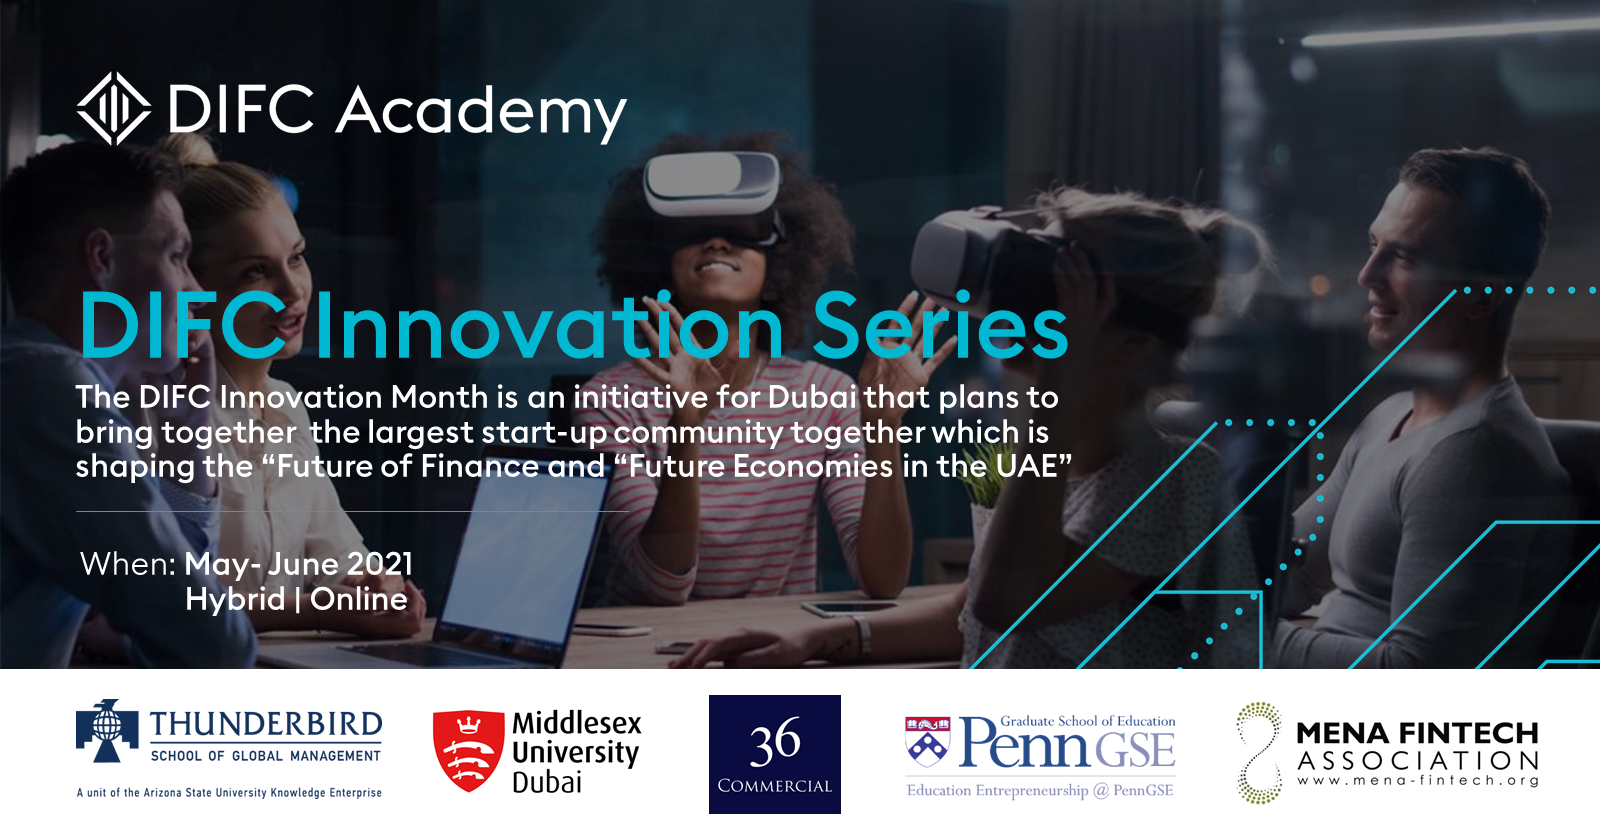 DIFC Innovation Series_1200x630px.png